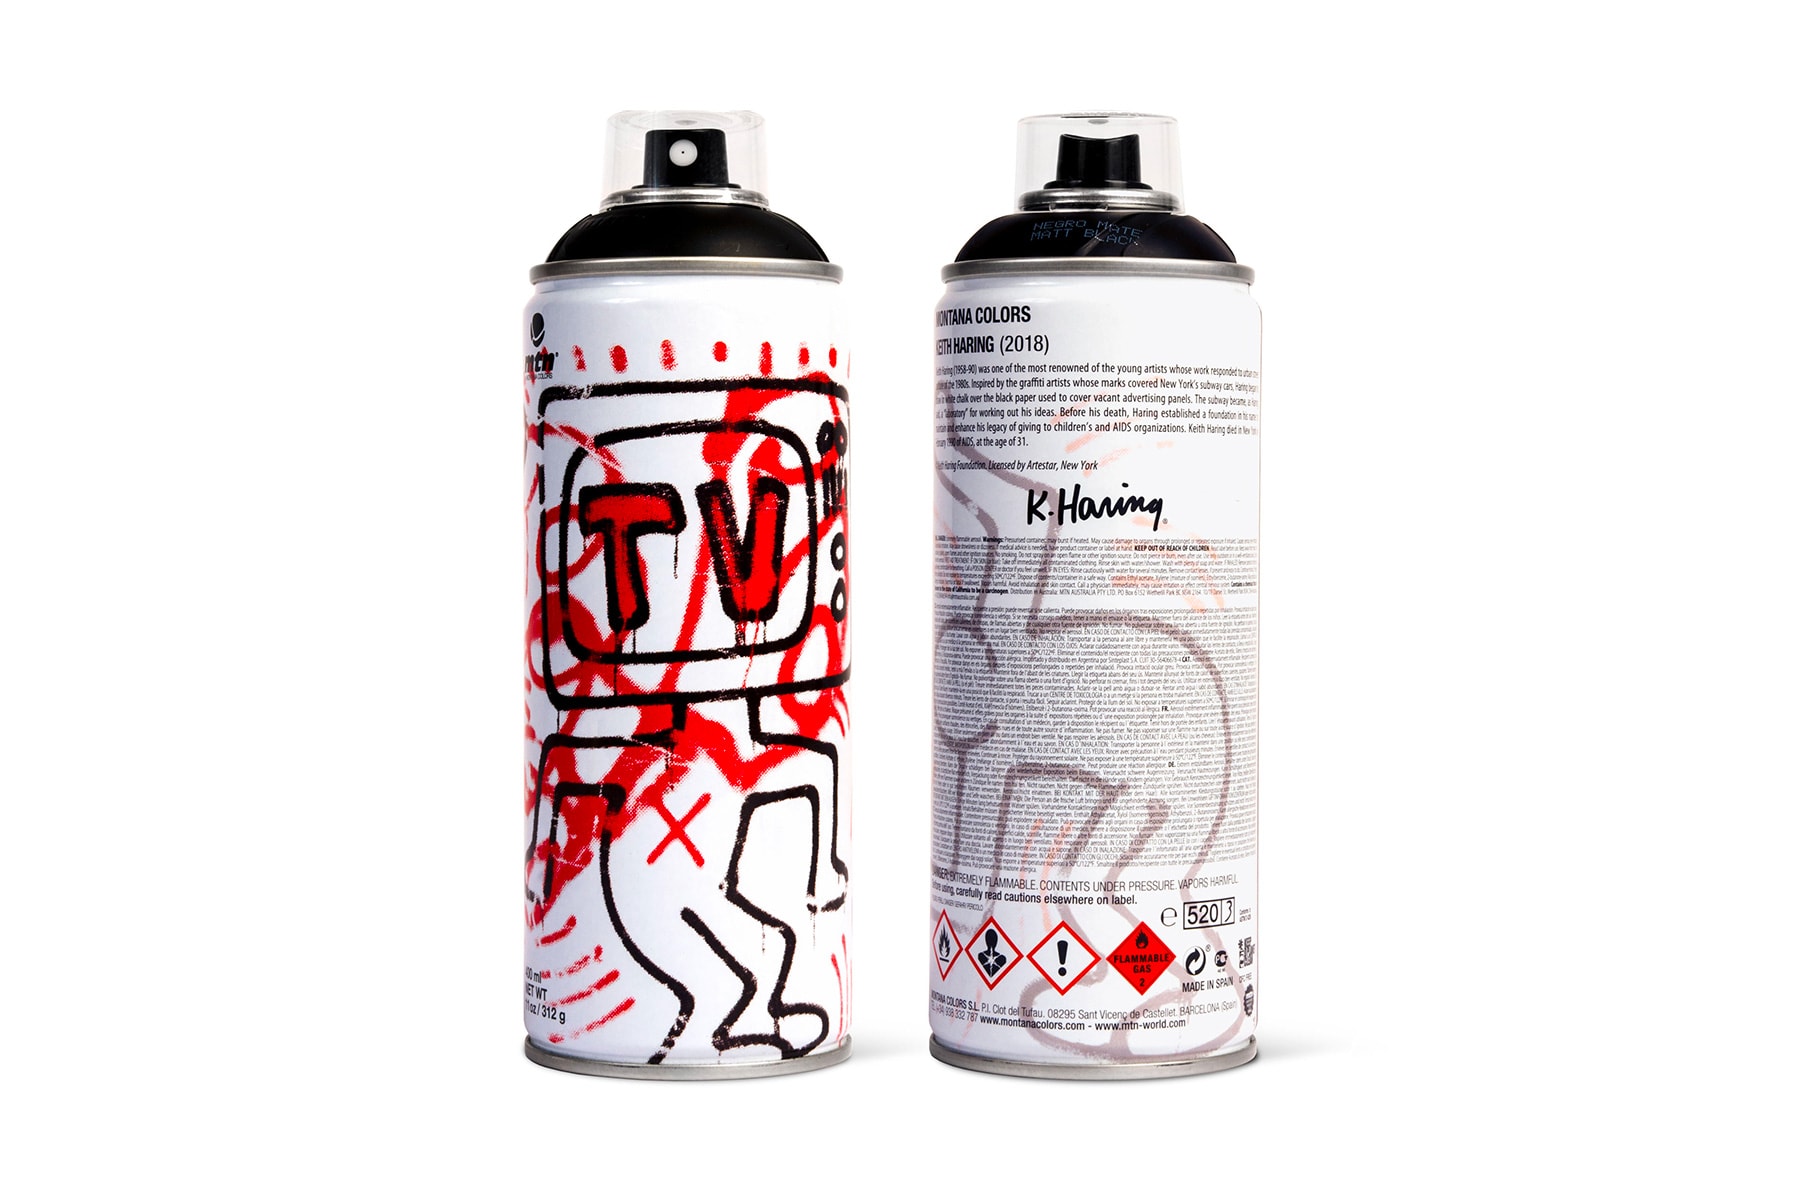 Montana colors Jean jmichel Basquiat Keith Haring Andre Saraiva Spray Paint Cans art graffiti Beyond the streets